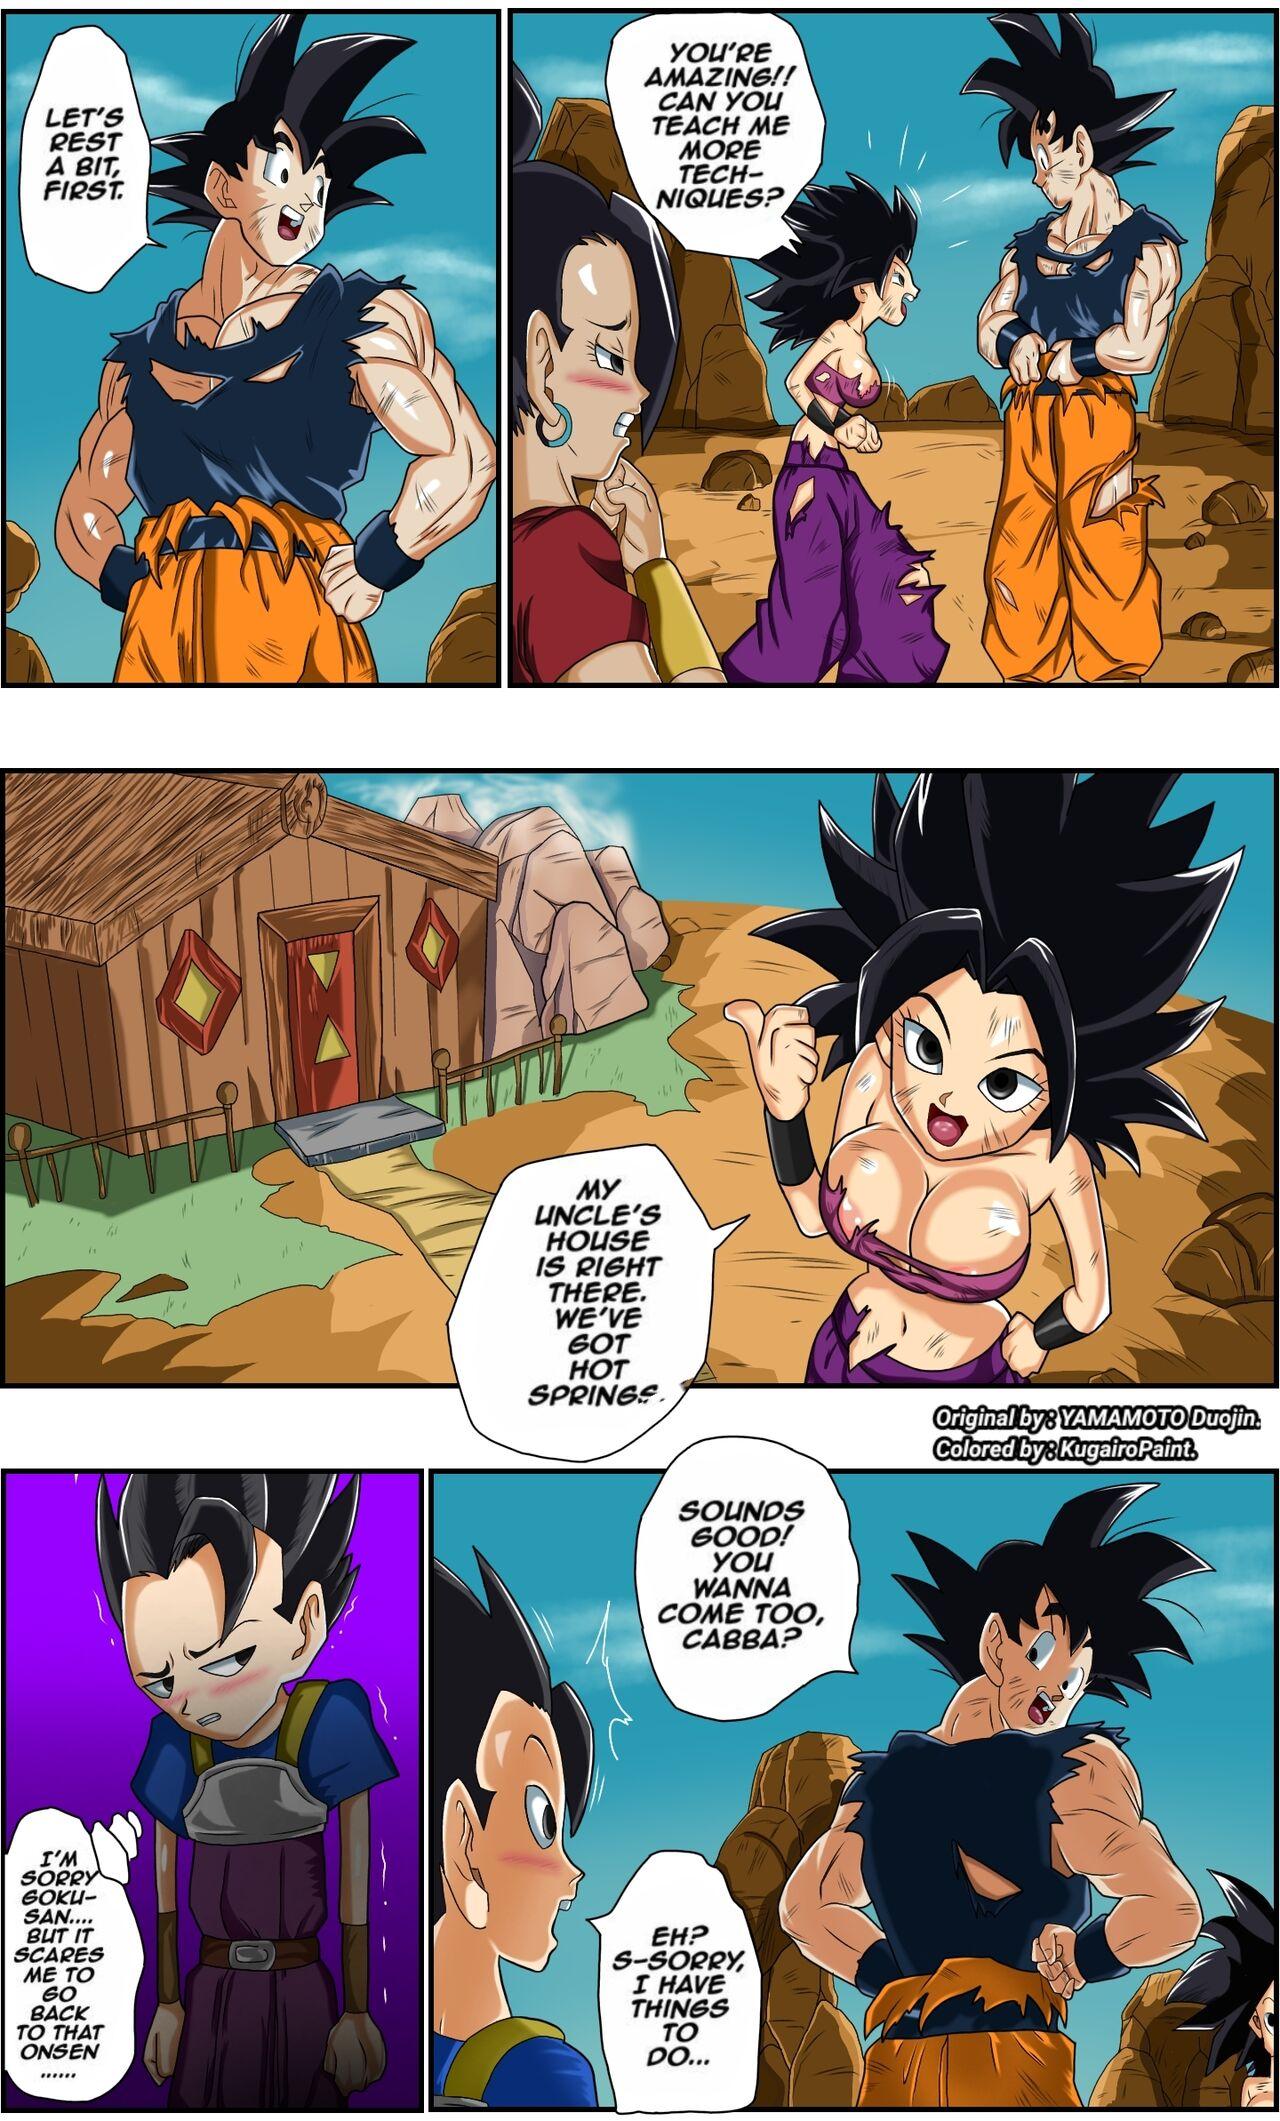 Full Movie Fight in the 6th Universe!! - Dragon ball super Wrestling - Page 6